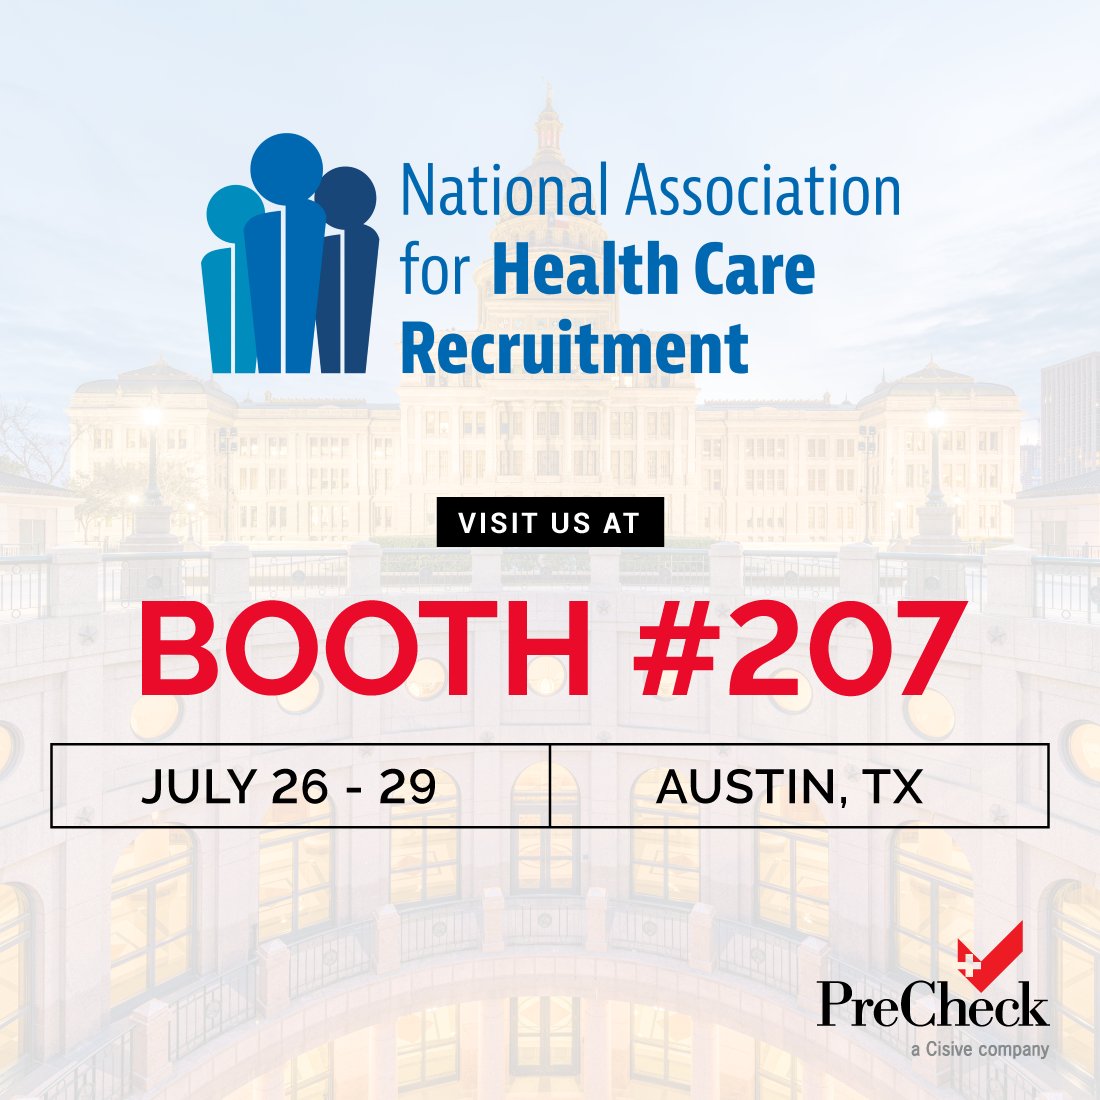 PreCheck will be exhibiting at the #NAHCR23 conference! Be sure to visit booth #207 to chat 1:1 with our team and discuss how we can help improve your #healthcarerecruitment process.